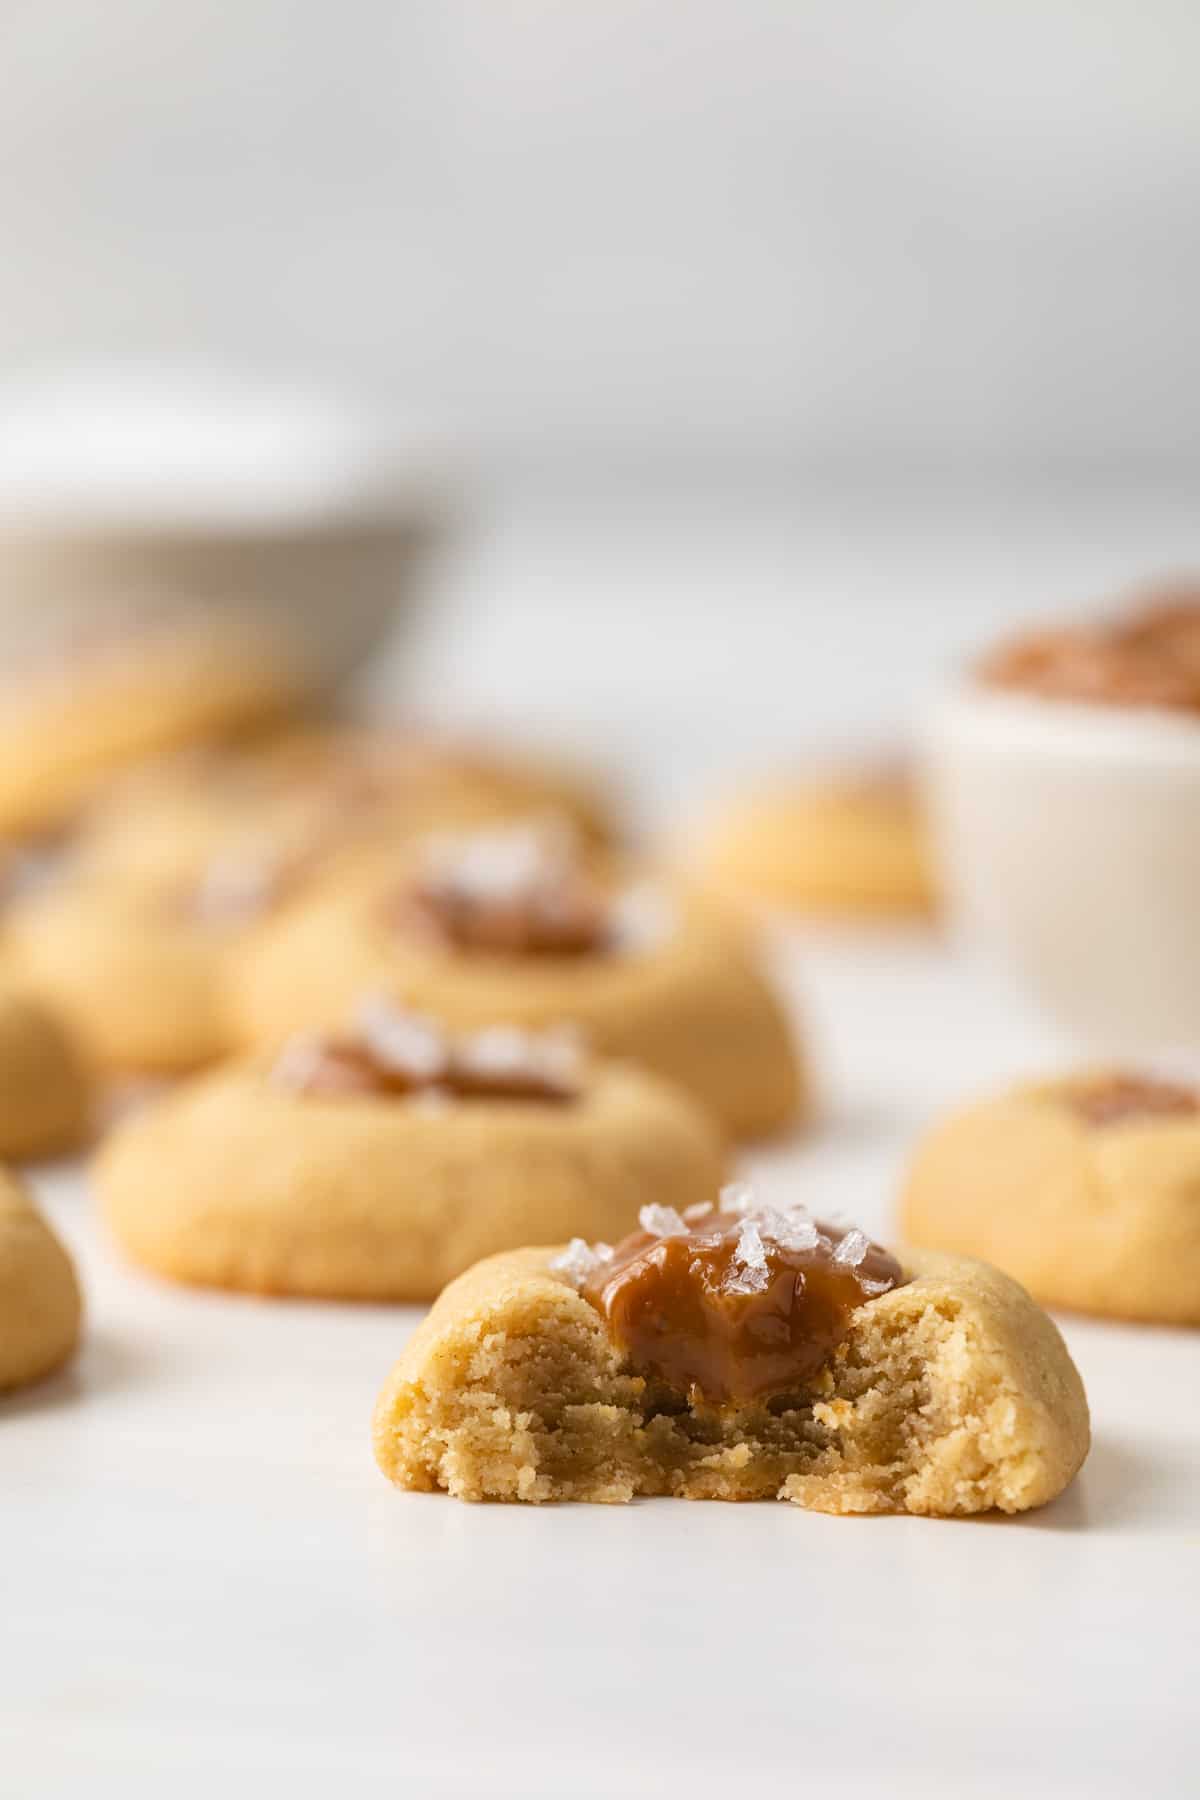 A dulce de leche thumbprint cookie with a bite missing and other cookies in the background